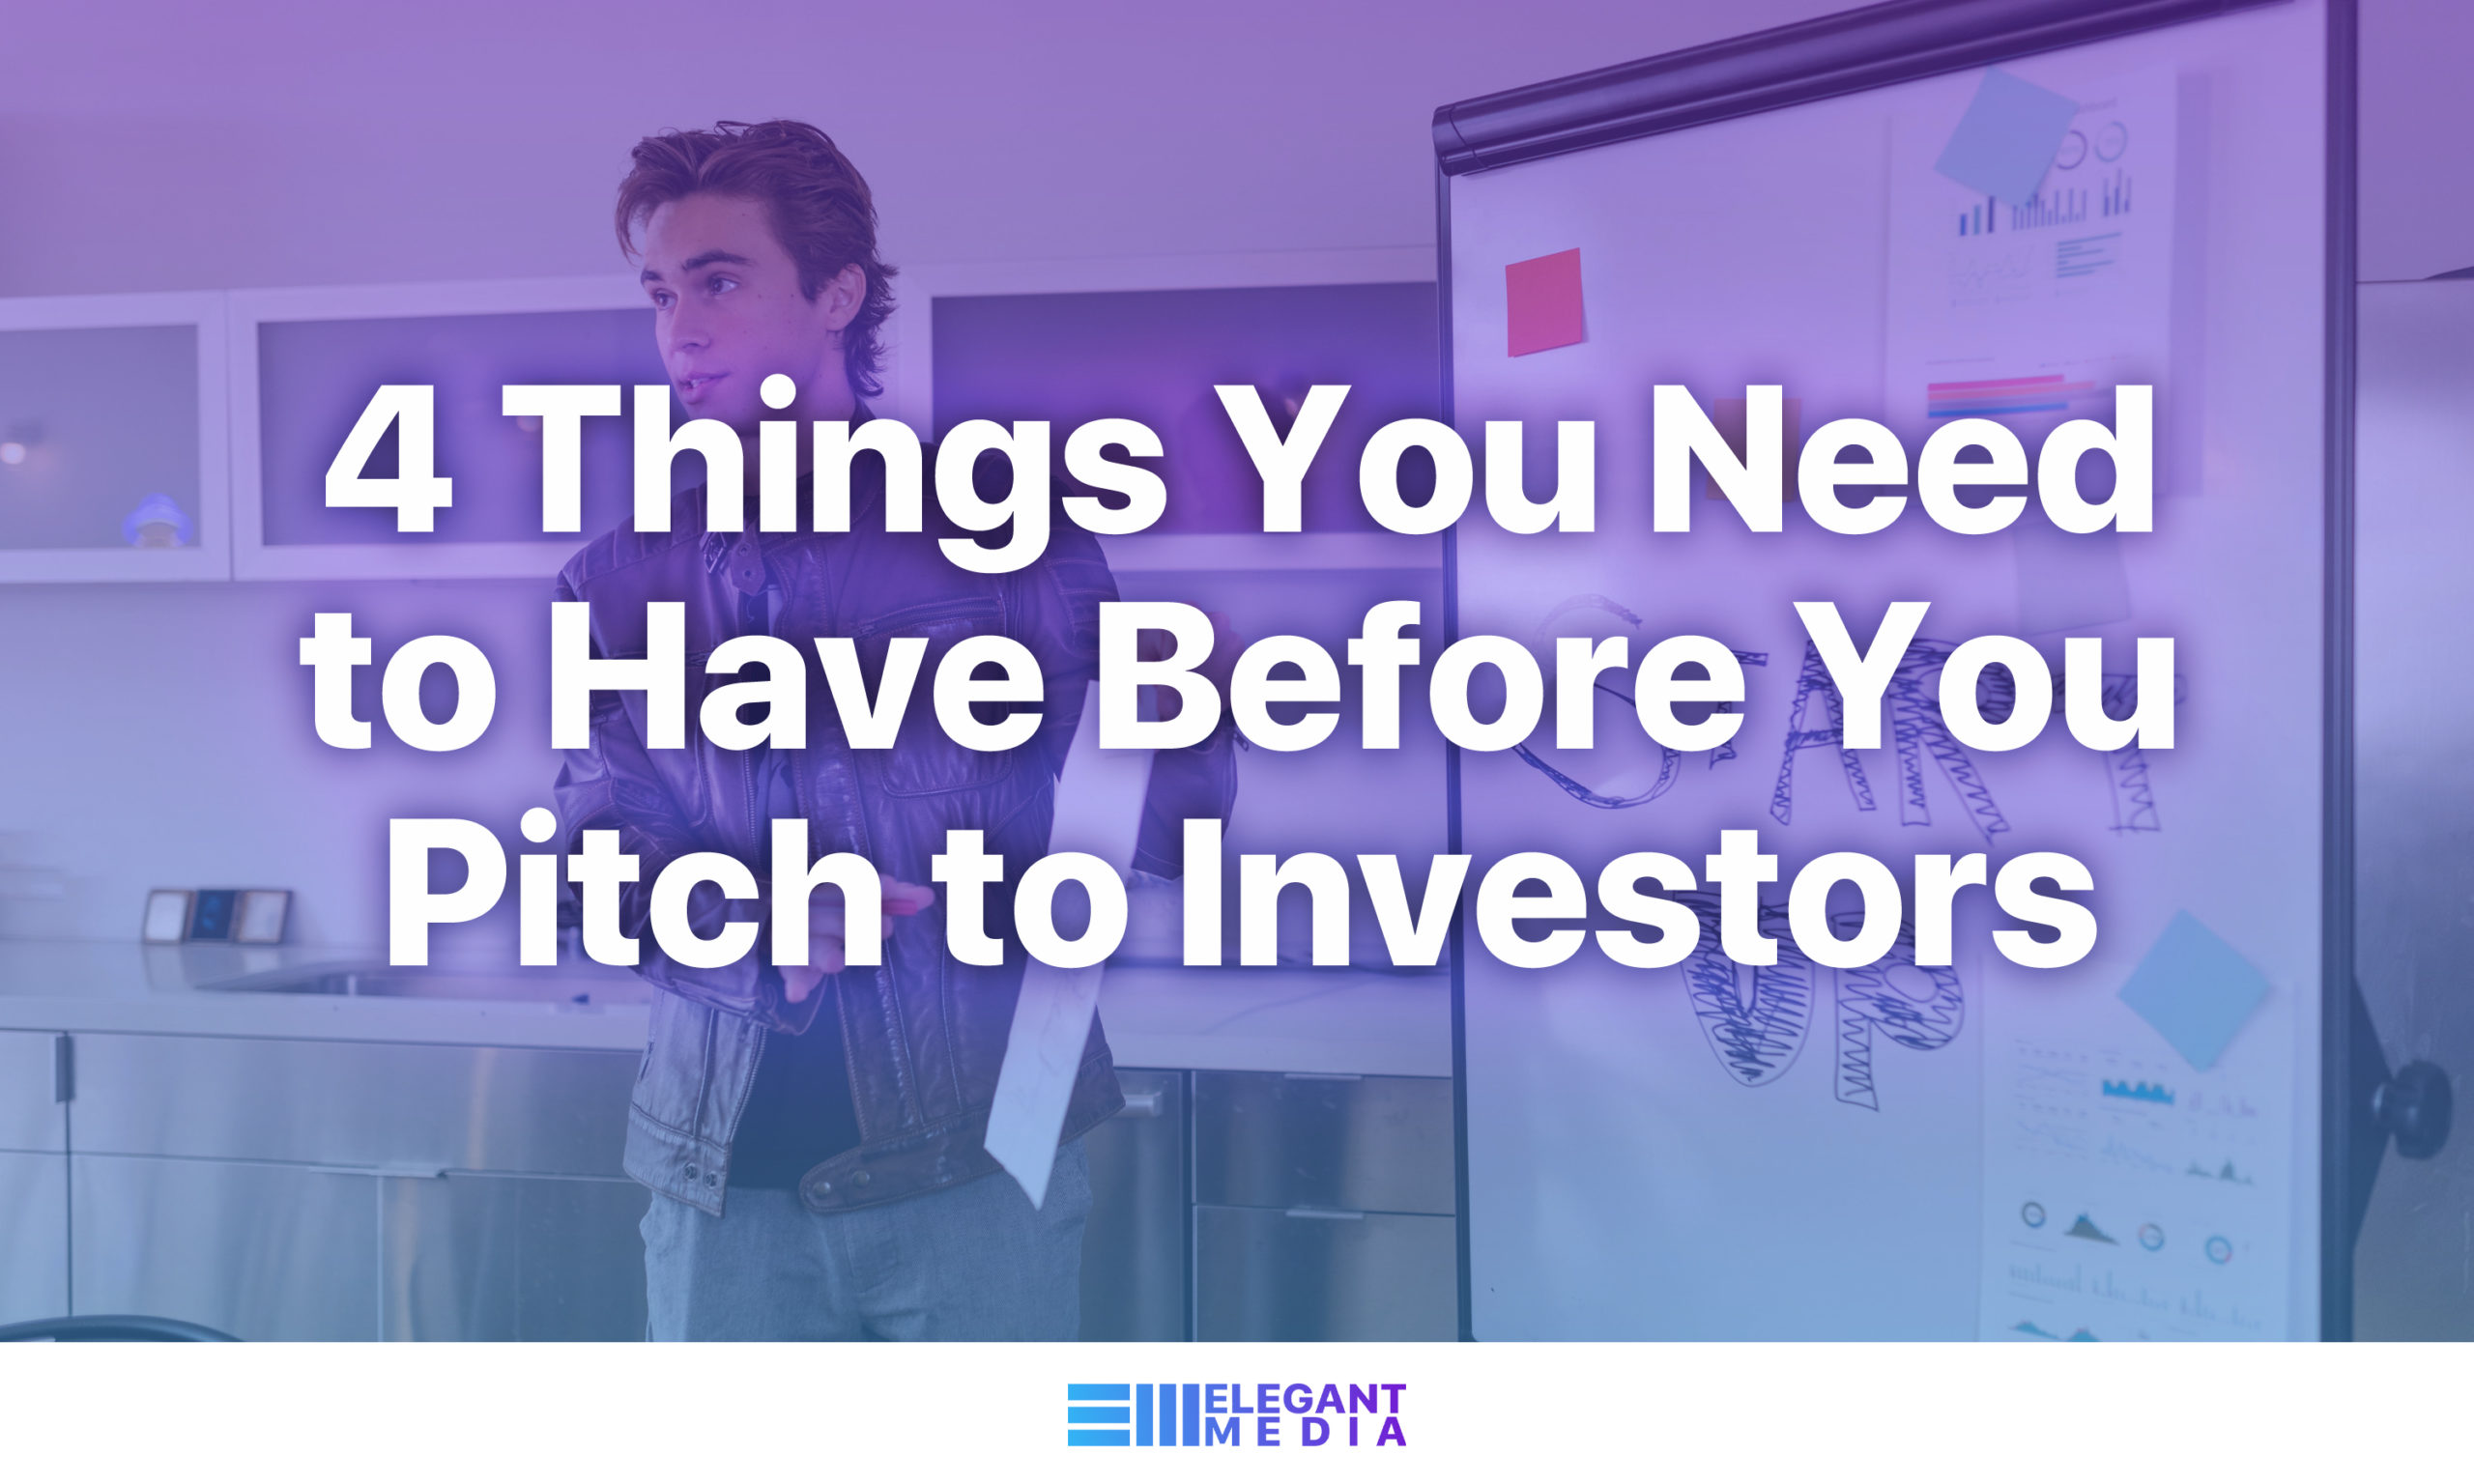 4 Things You Need to Have Before You Pitch to Investors